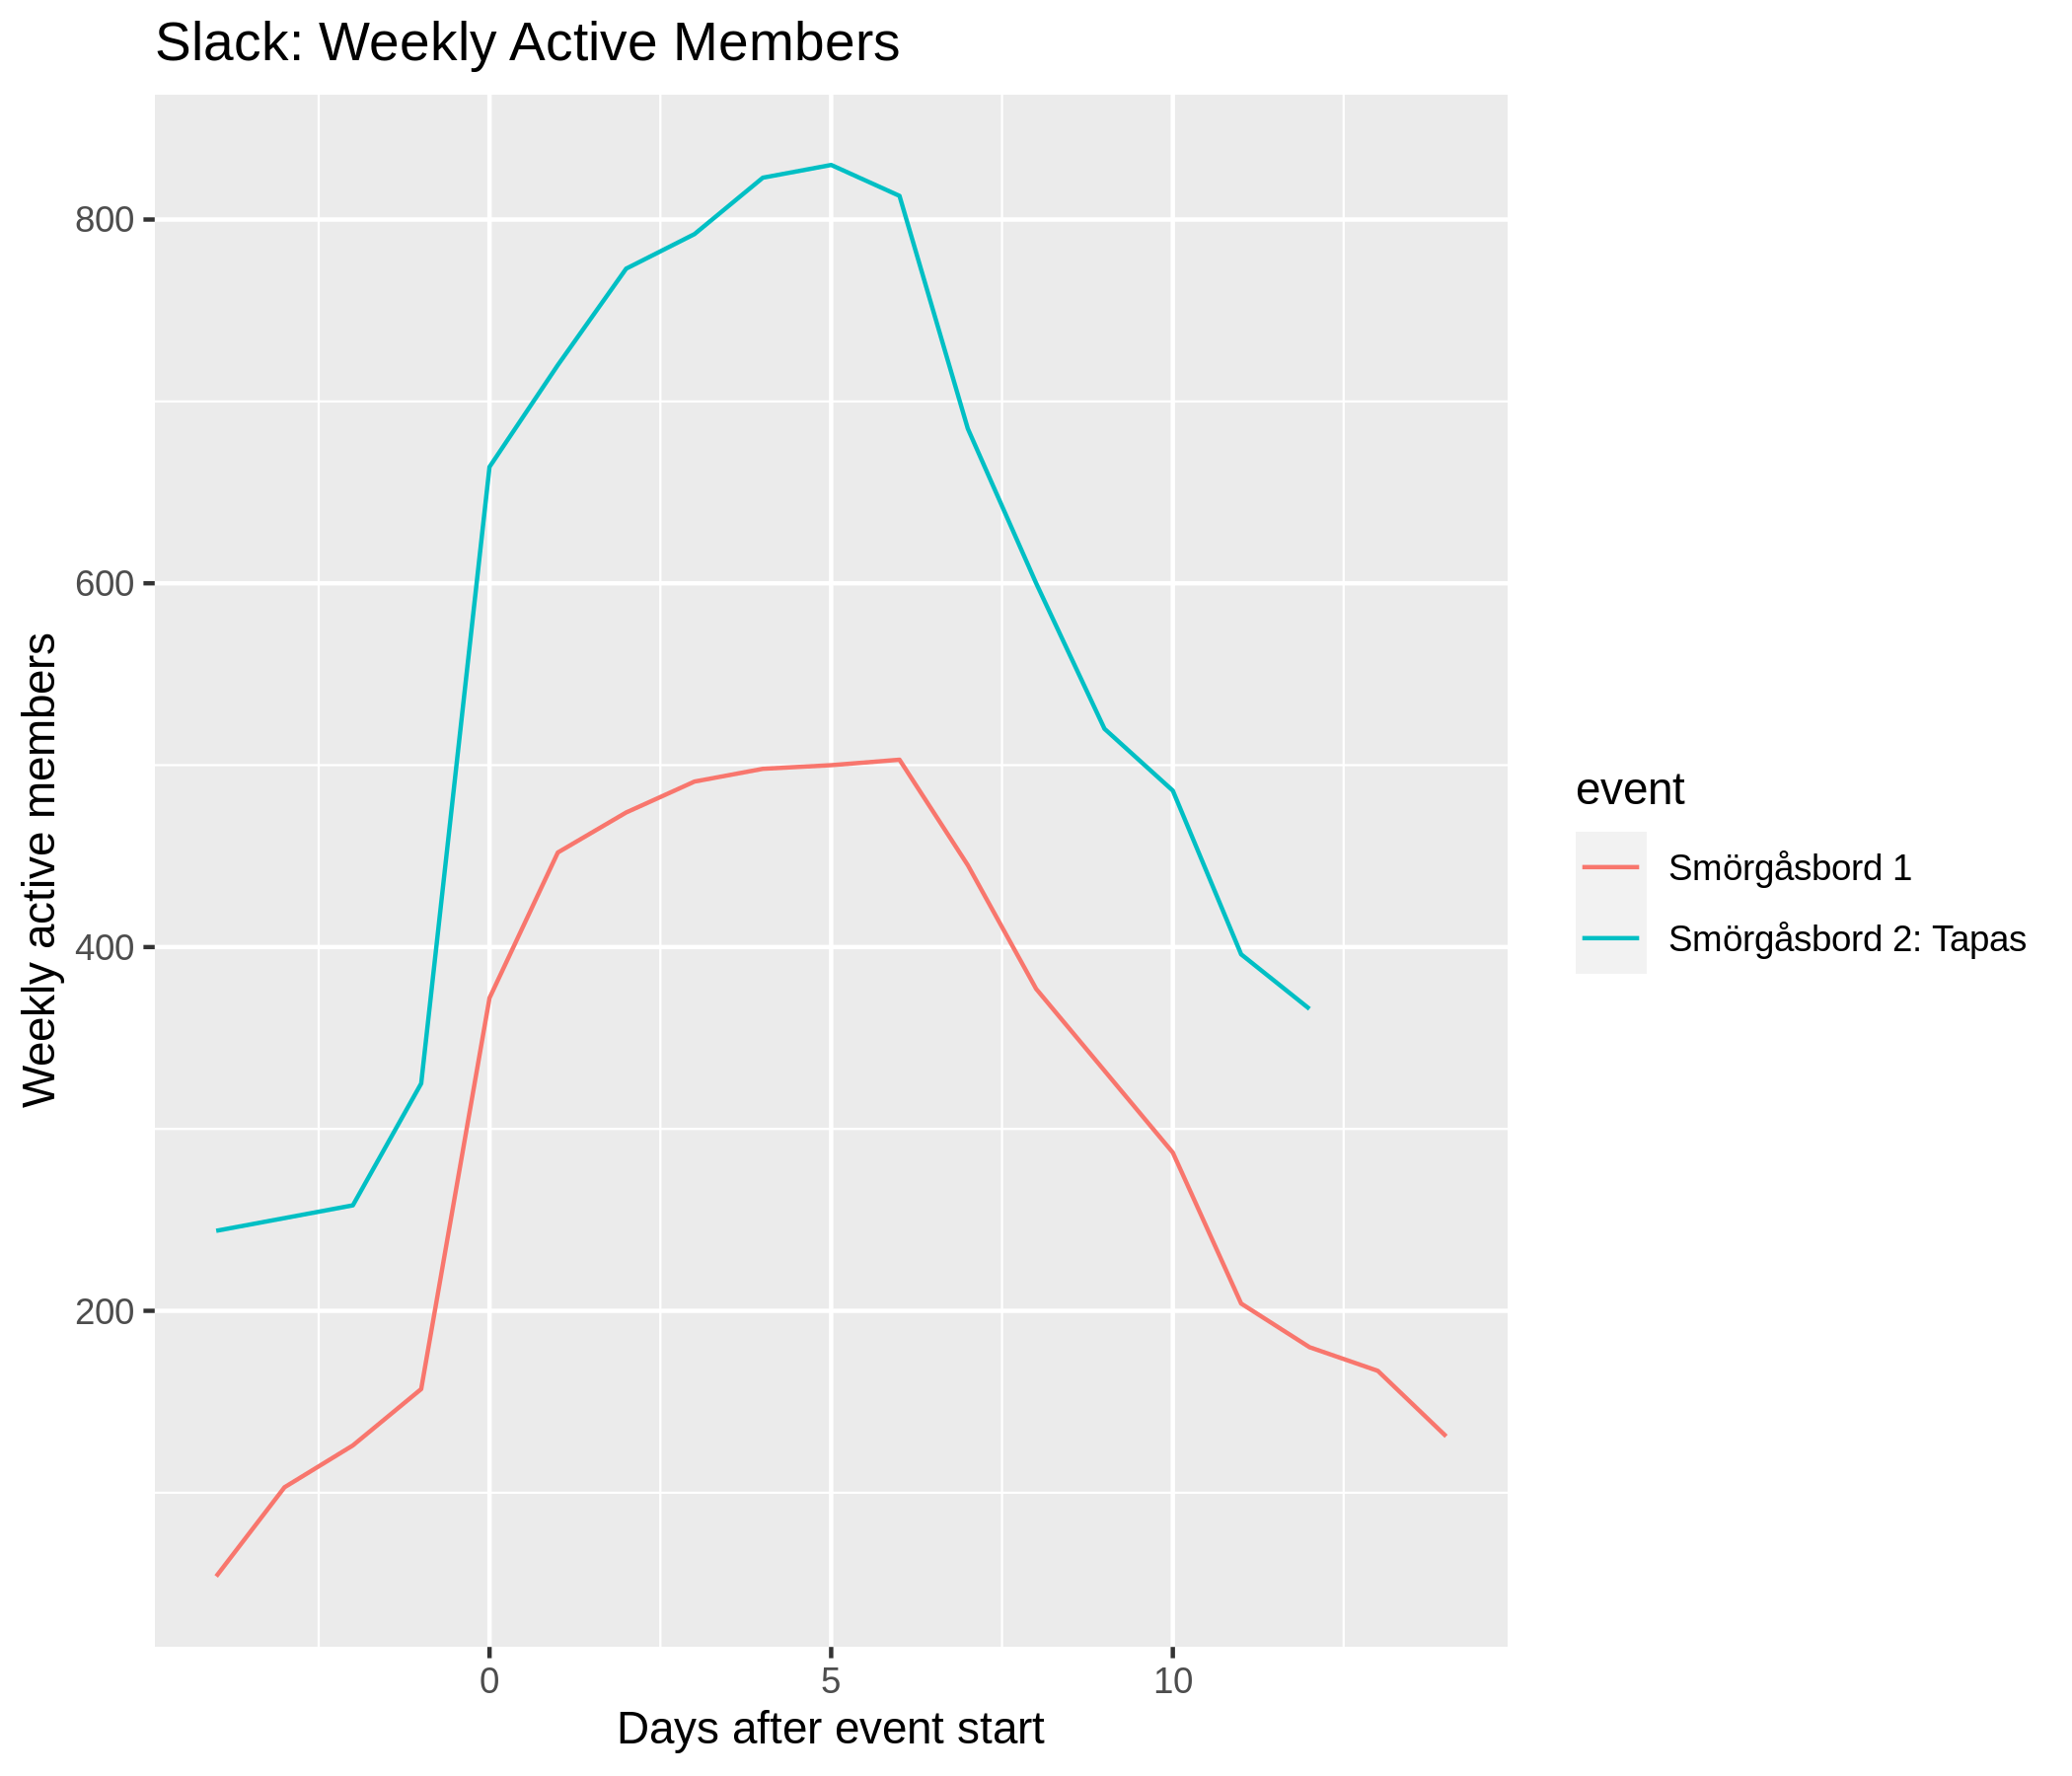 chart of slack weekly active members with lines for smorgasbord 1 and 2. 2 has approximately twice the number of weekly active members as its peak